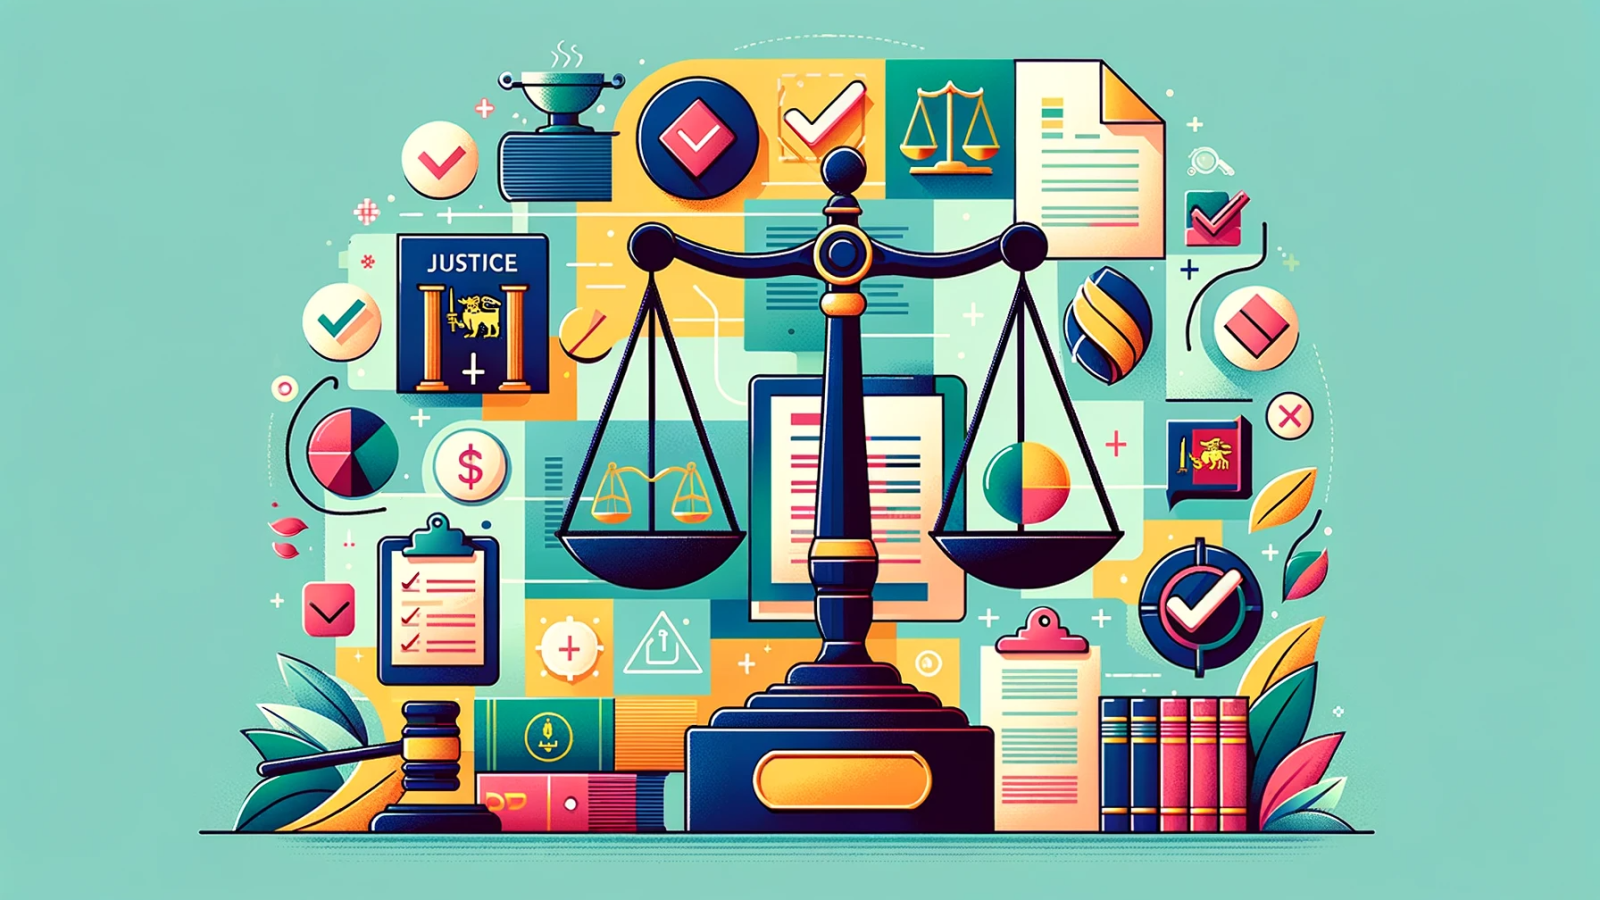 vector art illustration depicting the concept of legal compliance for business success in Sri Lanka